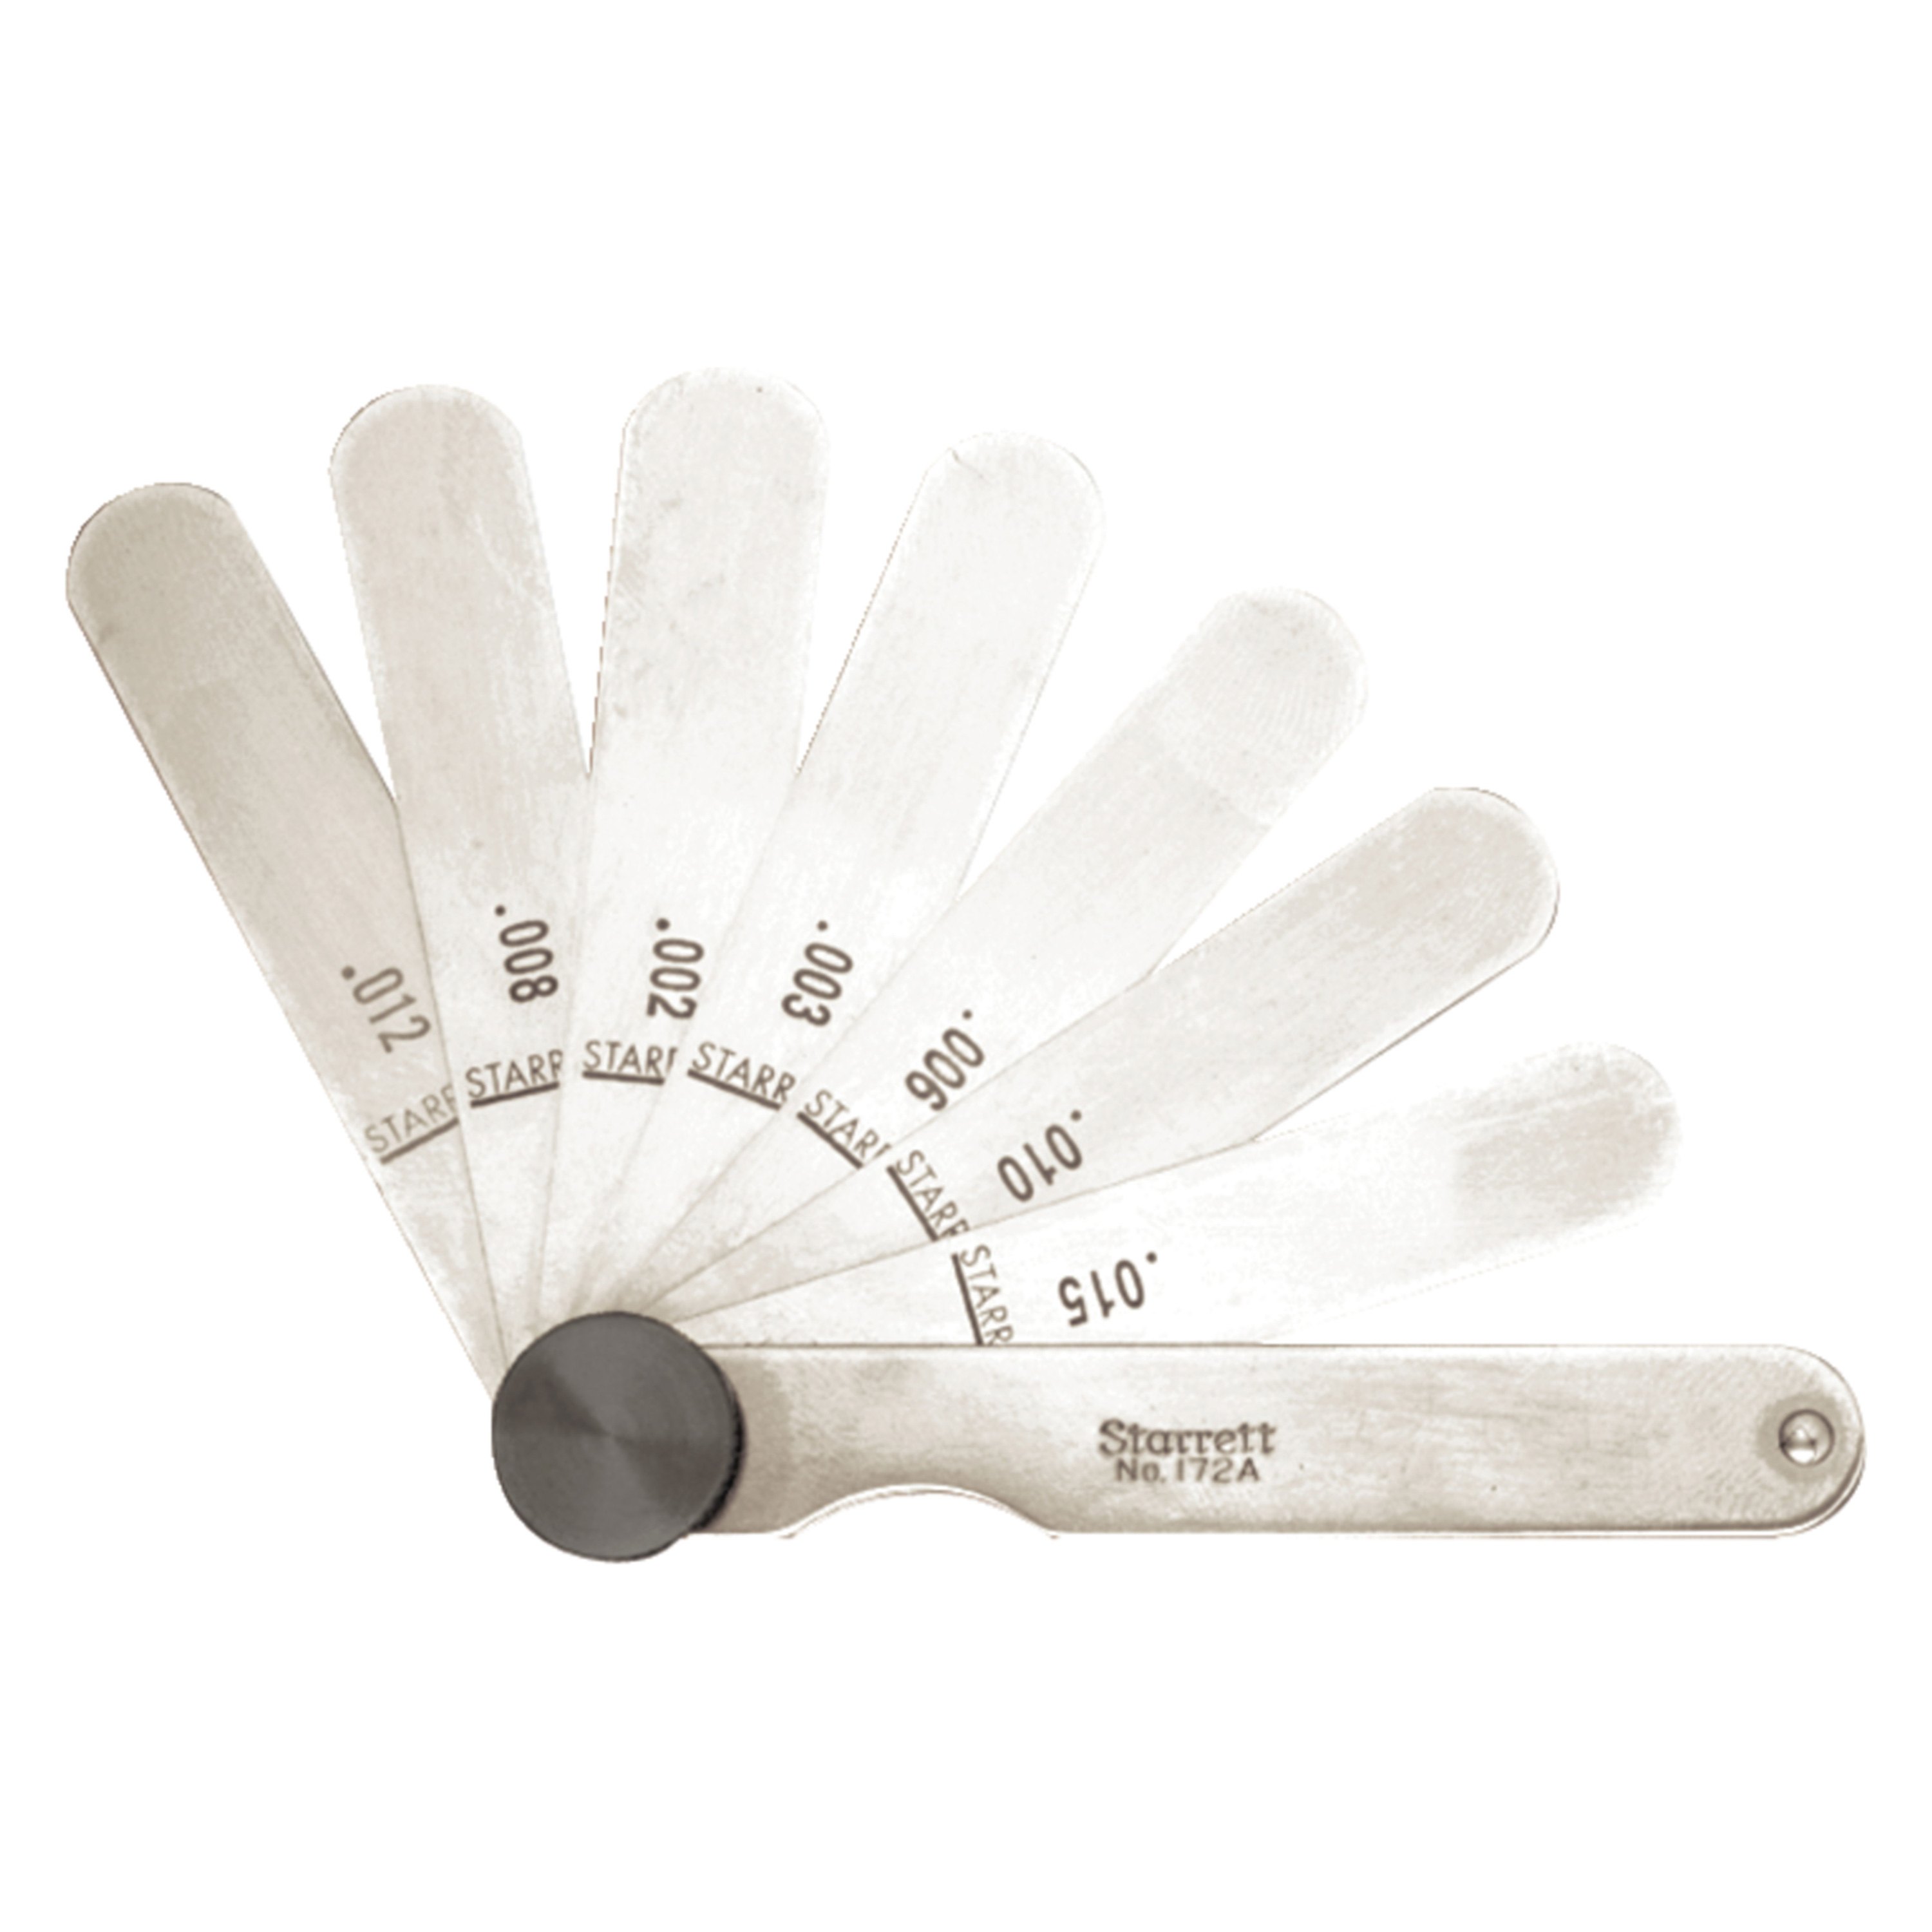 3-1/32 Length 0.0015-0.015 Thickness Starrett 172A Thickness Gage Set With Straight Leaves 9 Leaves 